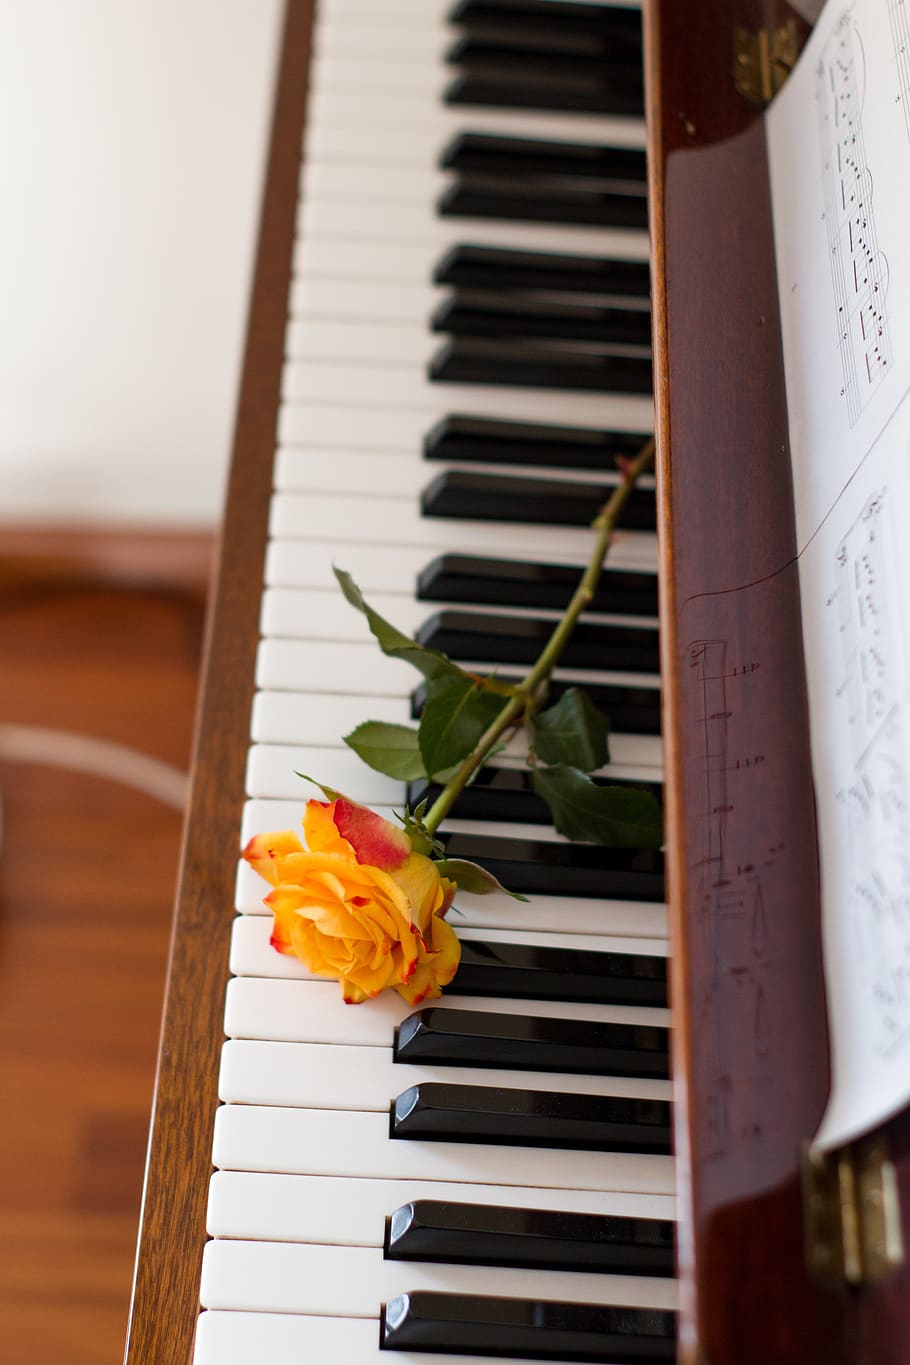 flower, music, piano, romantic, instrument, flowering plant, plant, beauty in nature, nature, freshness